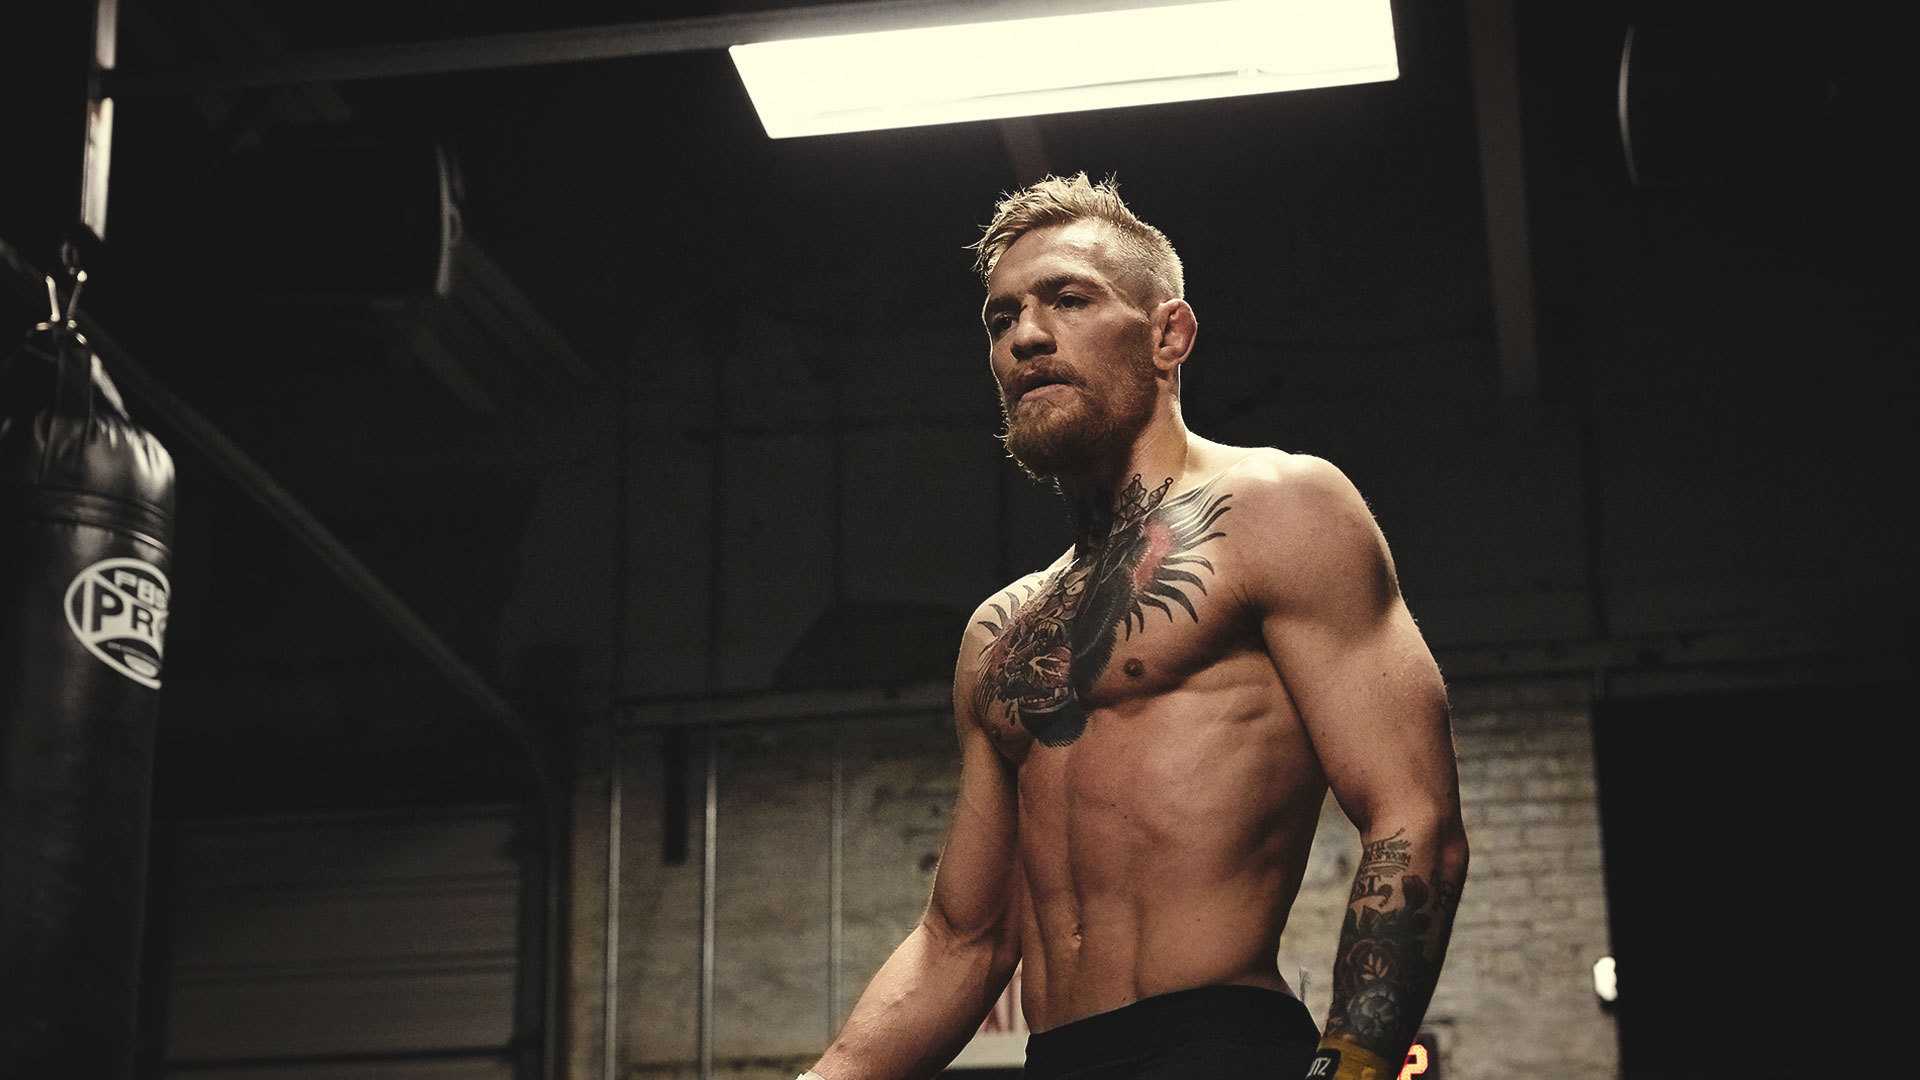 Conor Mcgregor HD In High Quality And Full Wallpaper For Desktop